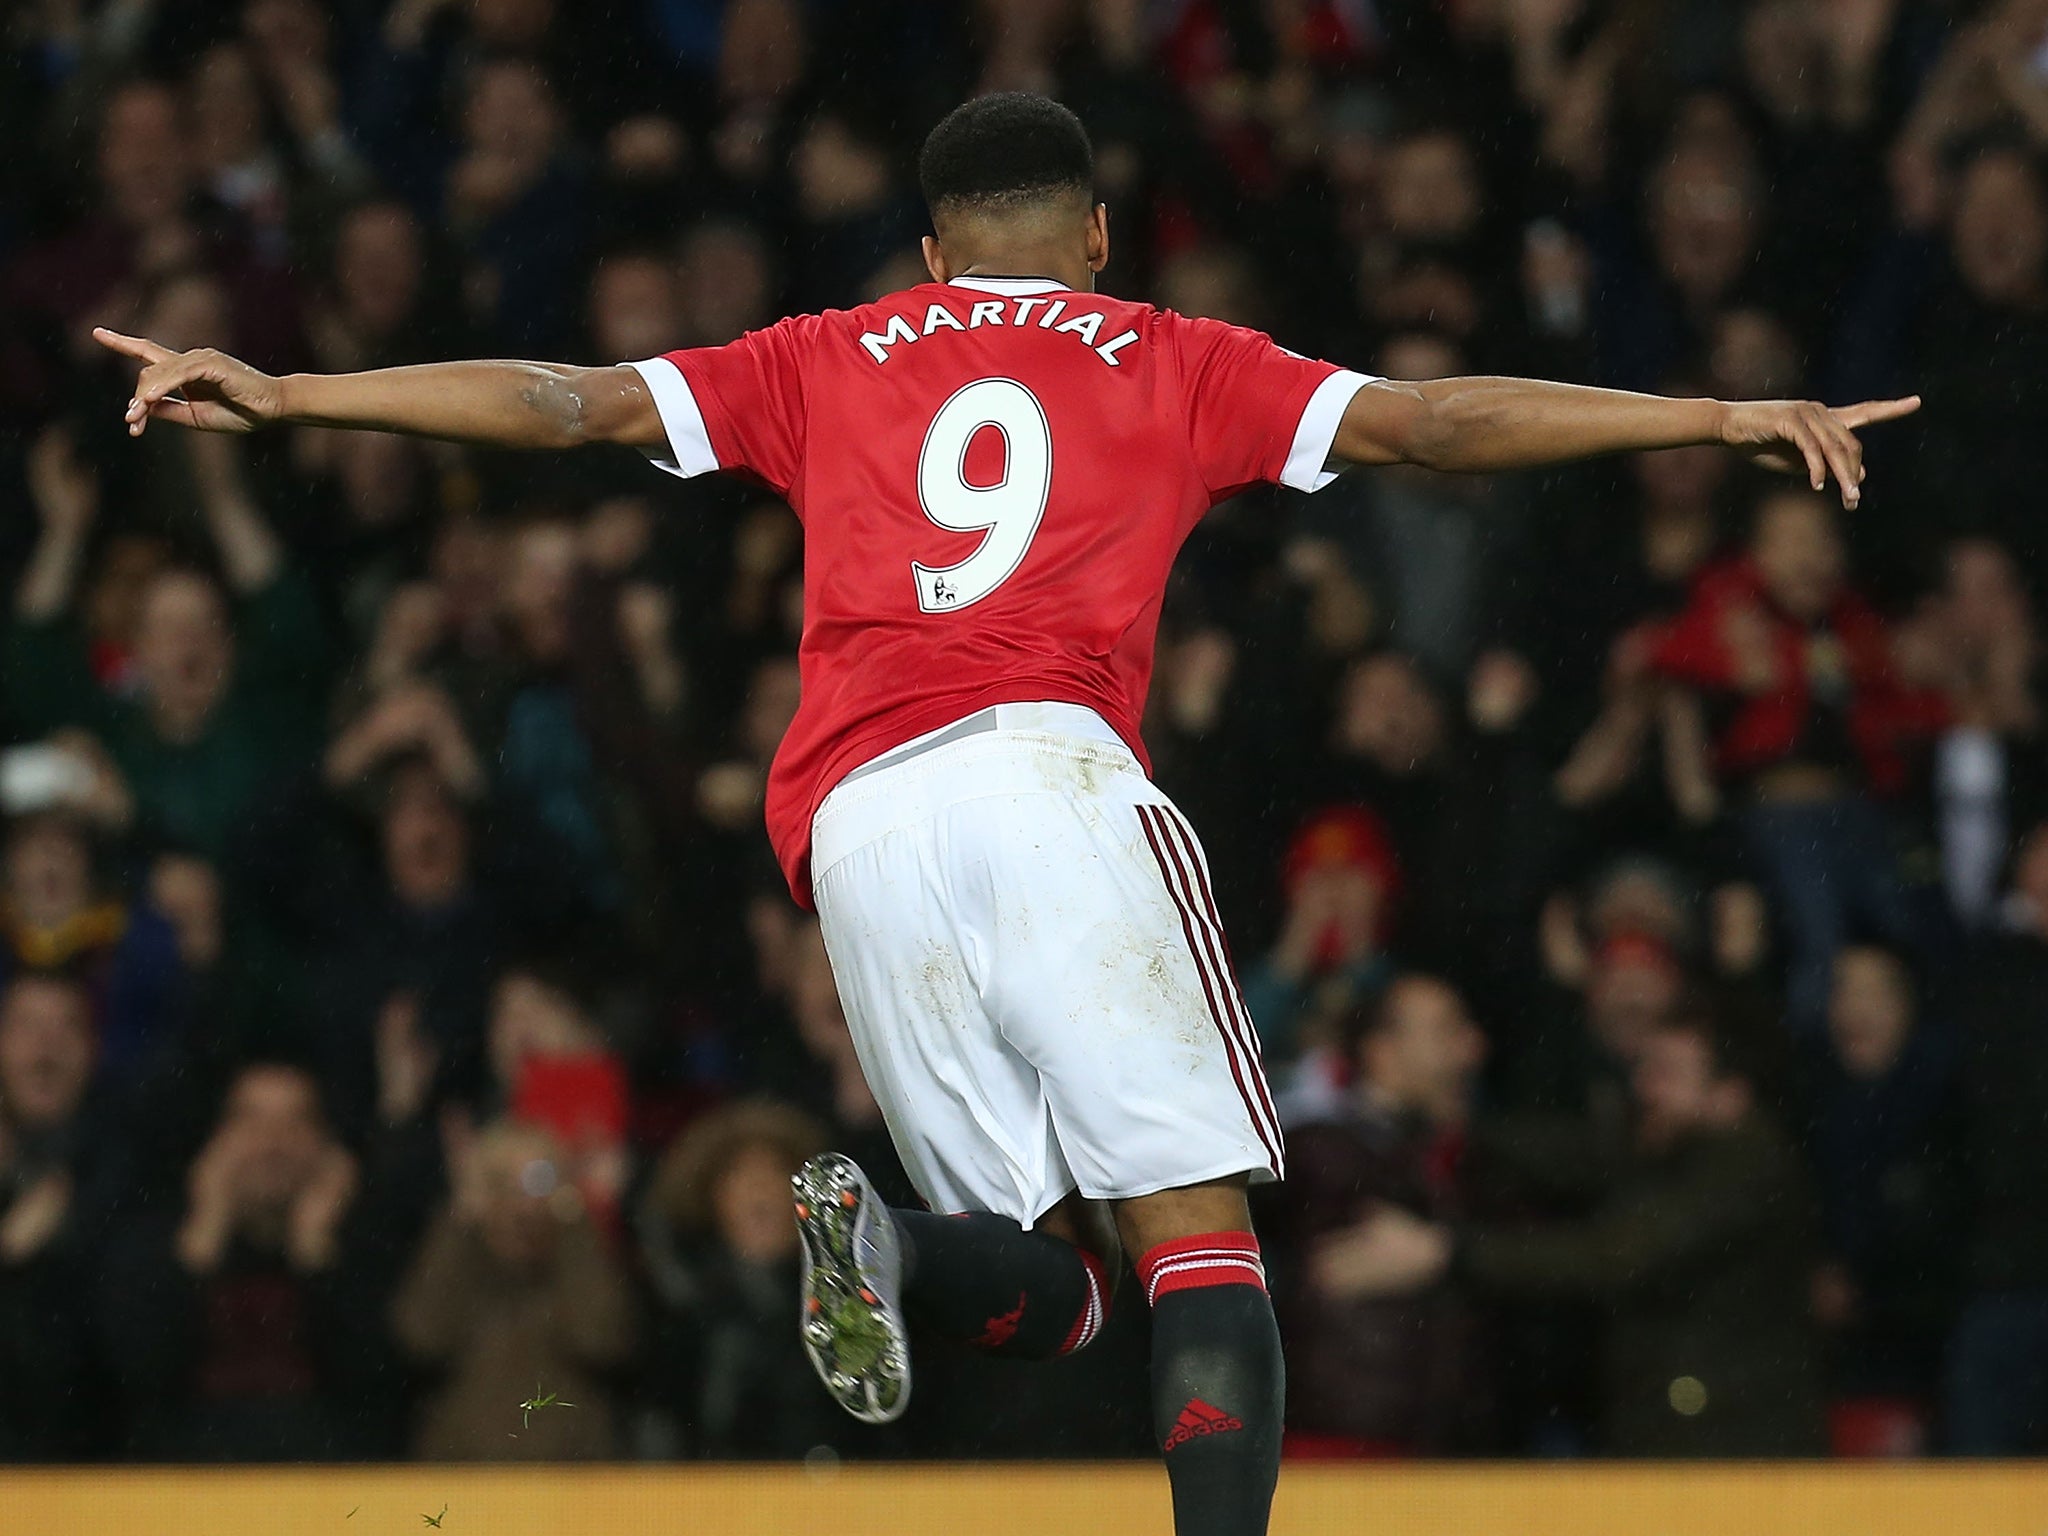 Anthony Martial wheels away after scoring against Swansea City